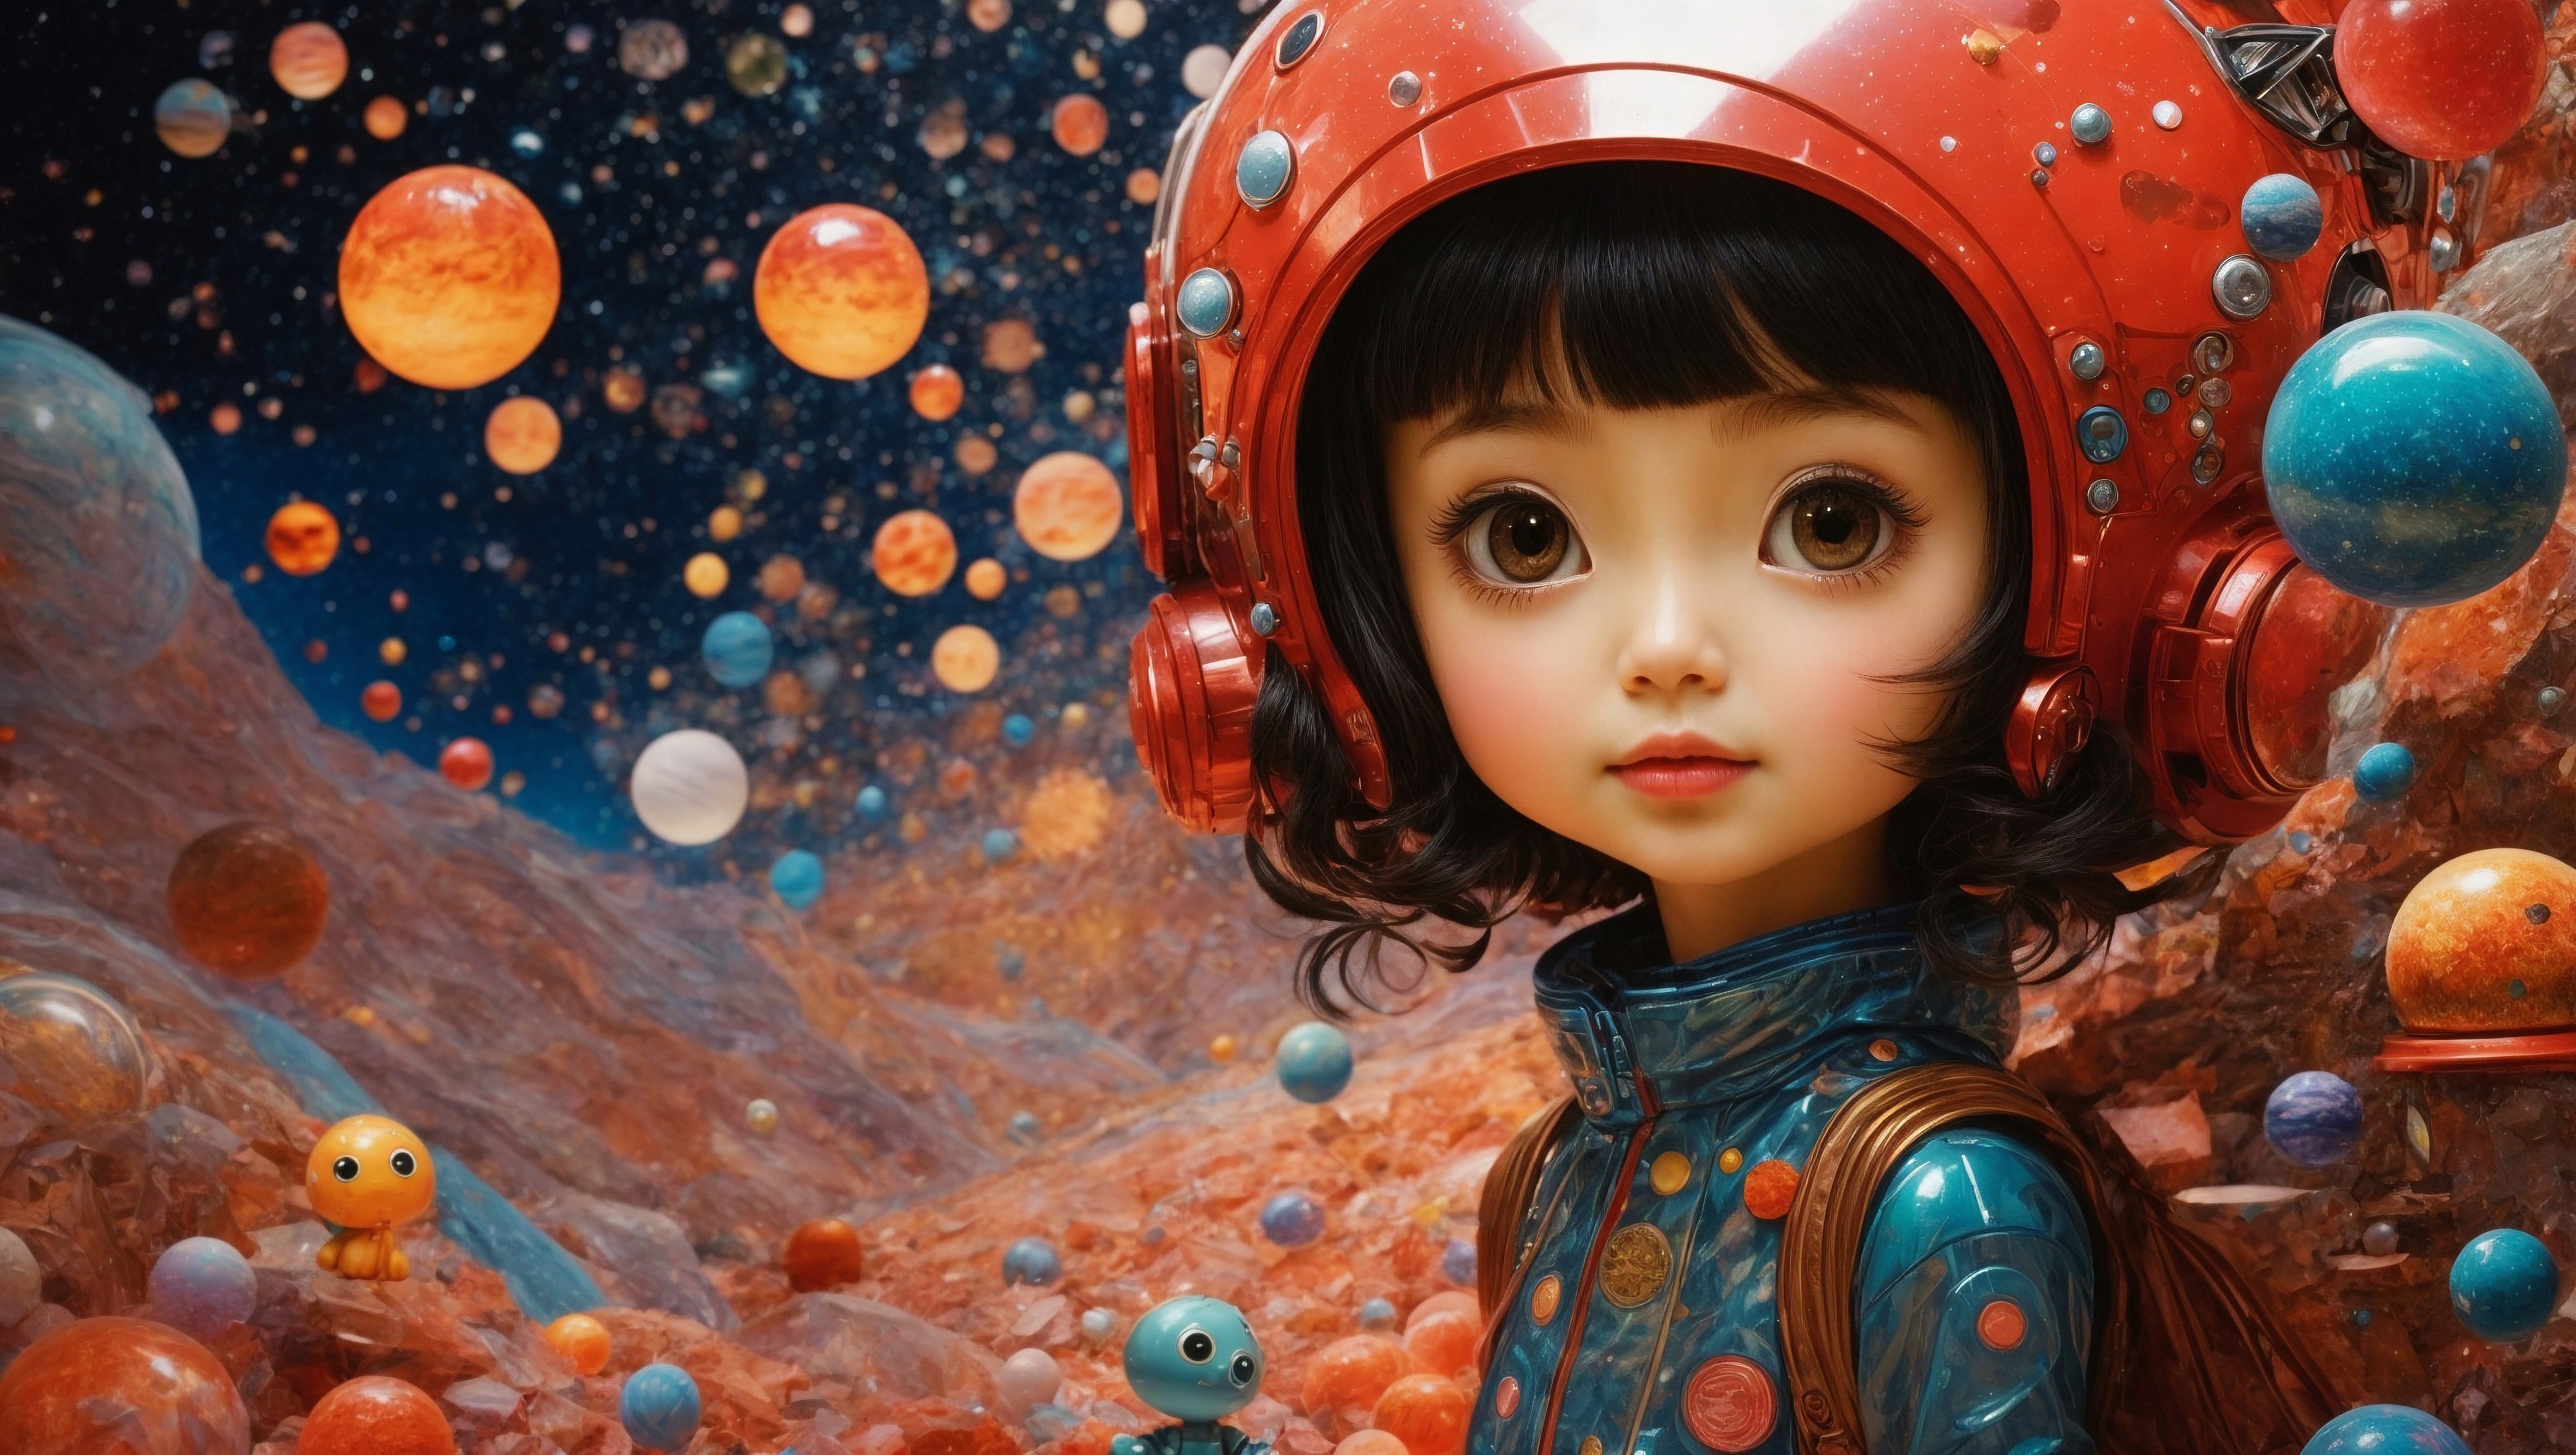 Free photo A young girl dressed as an alien in space with orange, blue and orange balloons